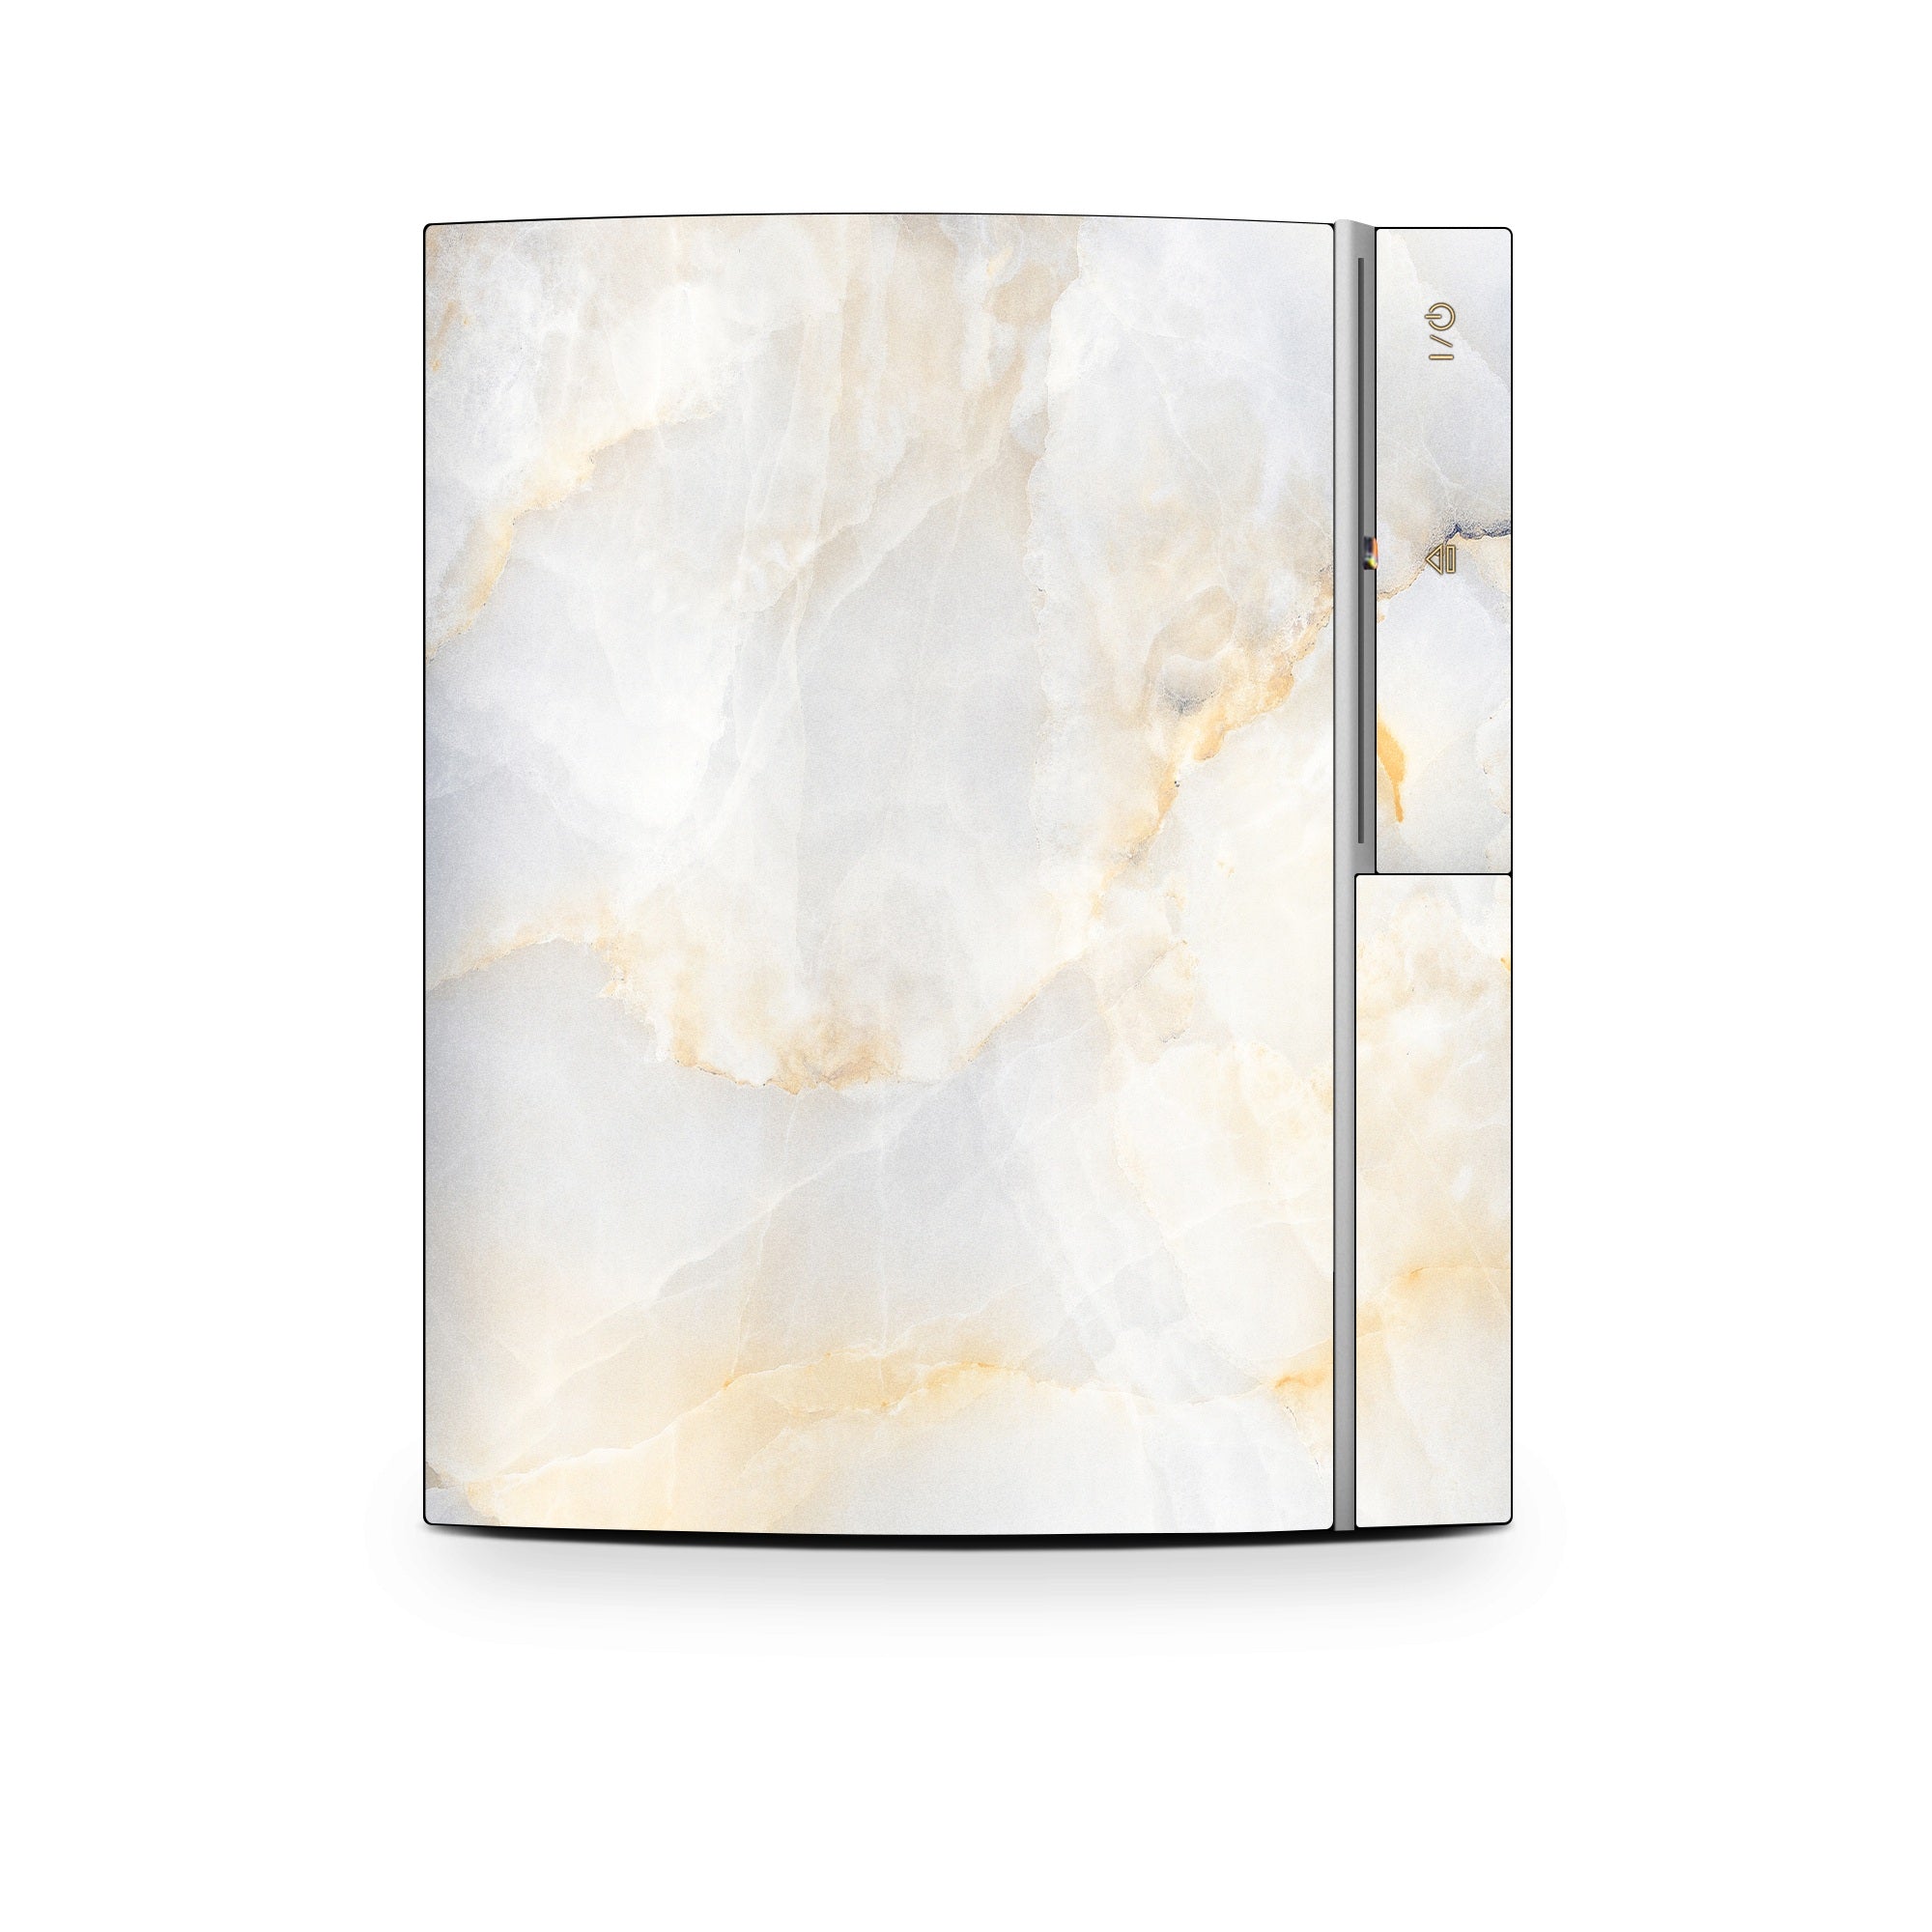 Dune Marble - Sony PS3 Skin